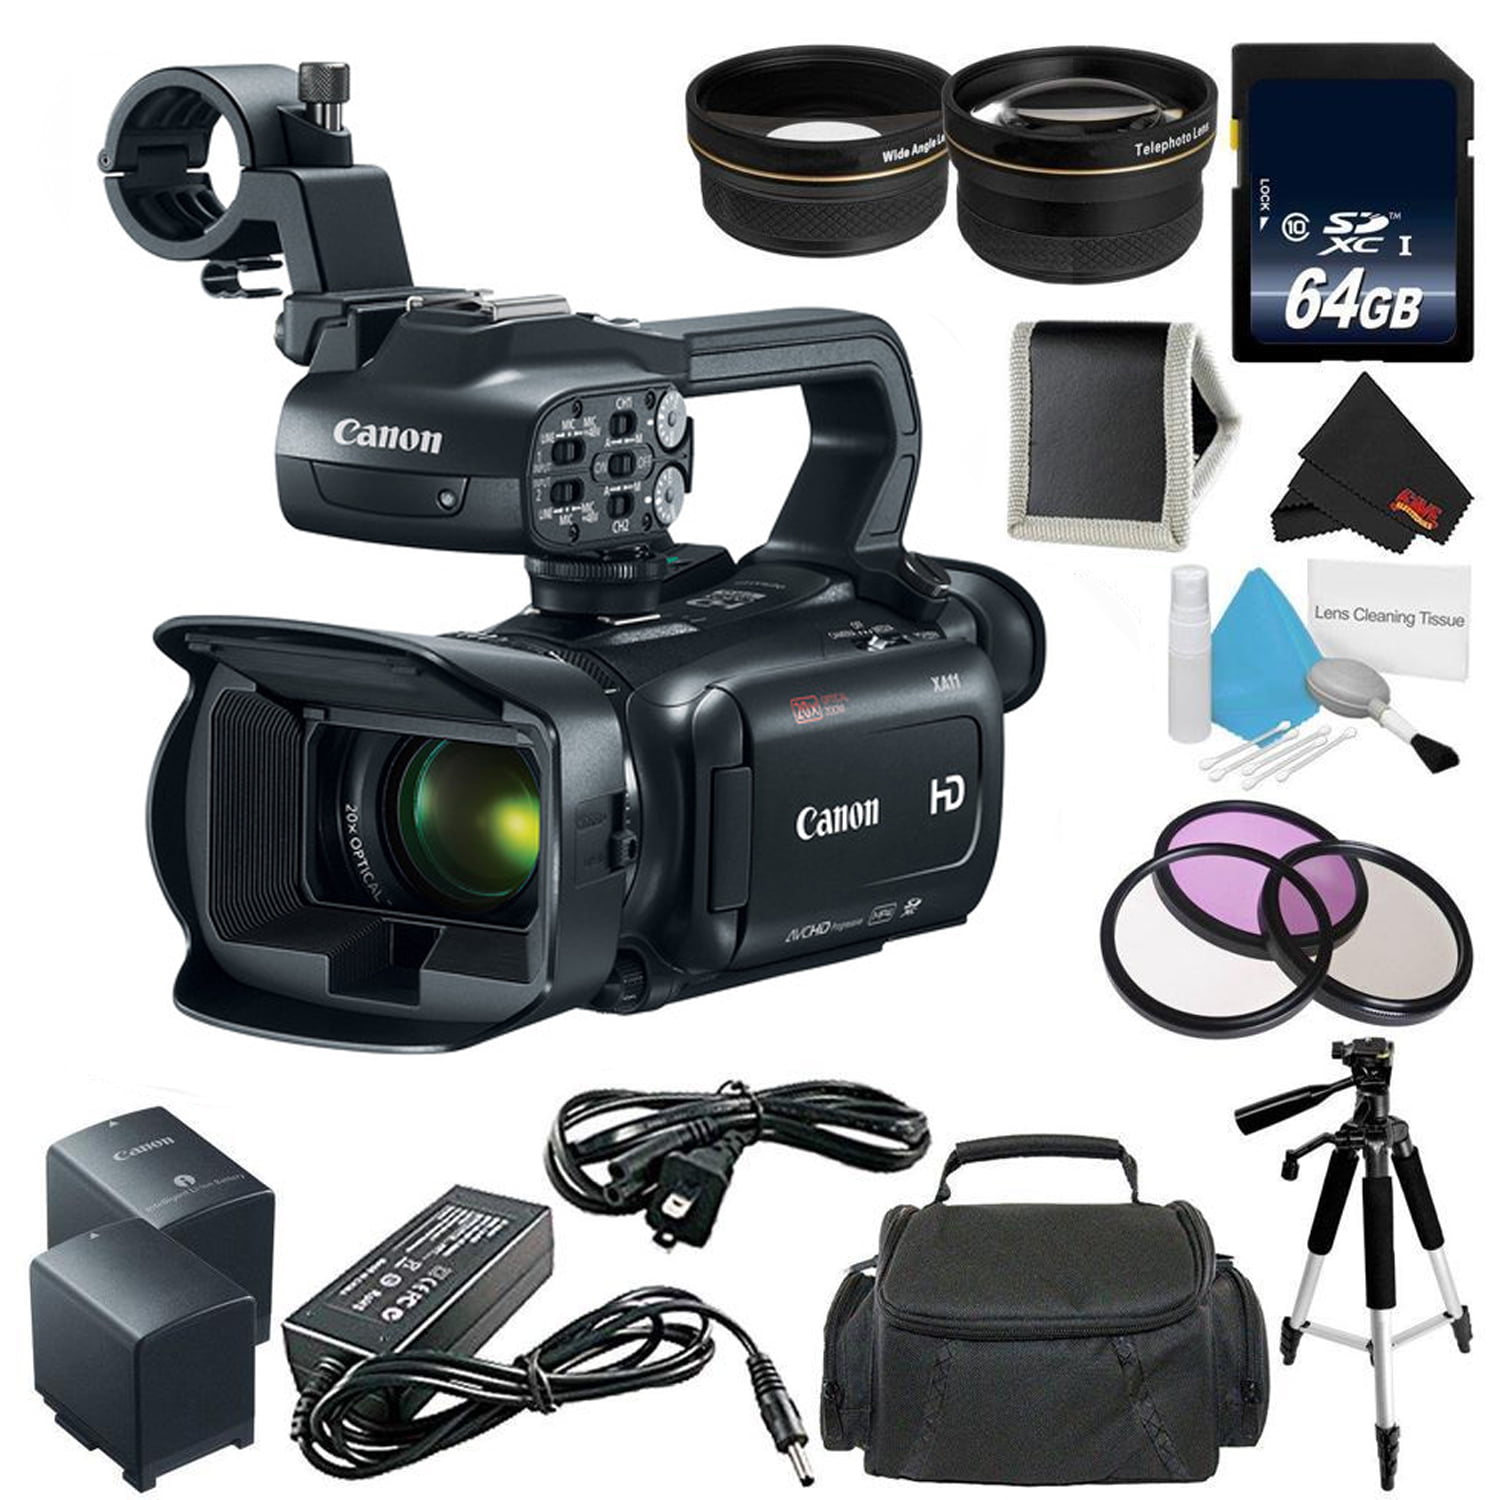 More Canon XA11 Compact Full HD Camcorder with HDMI and Composite Output- Bundle with 64GB Memory Card